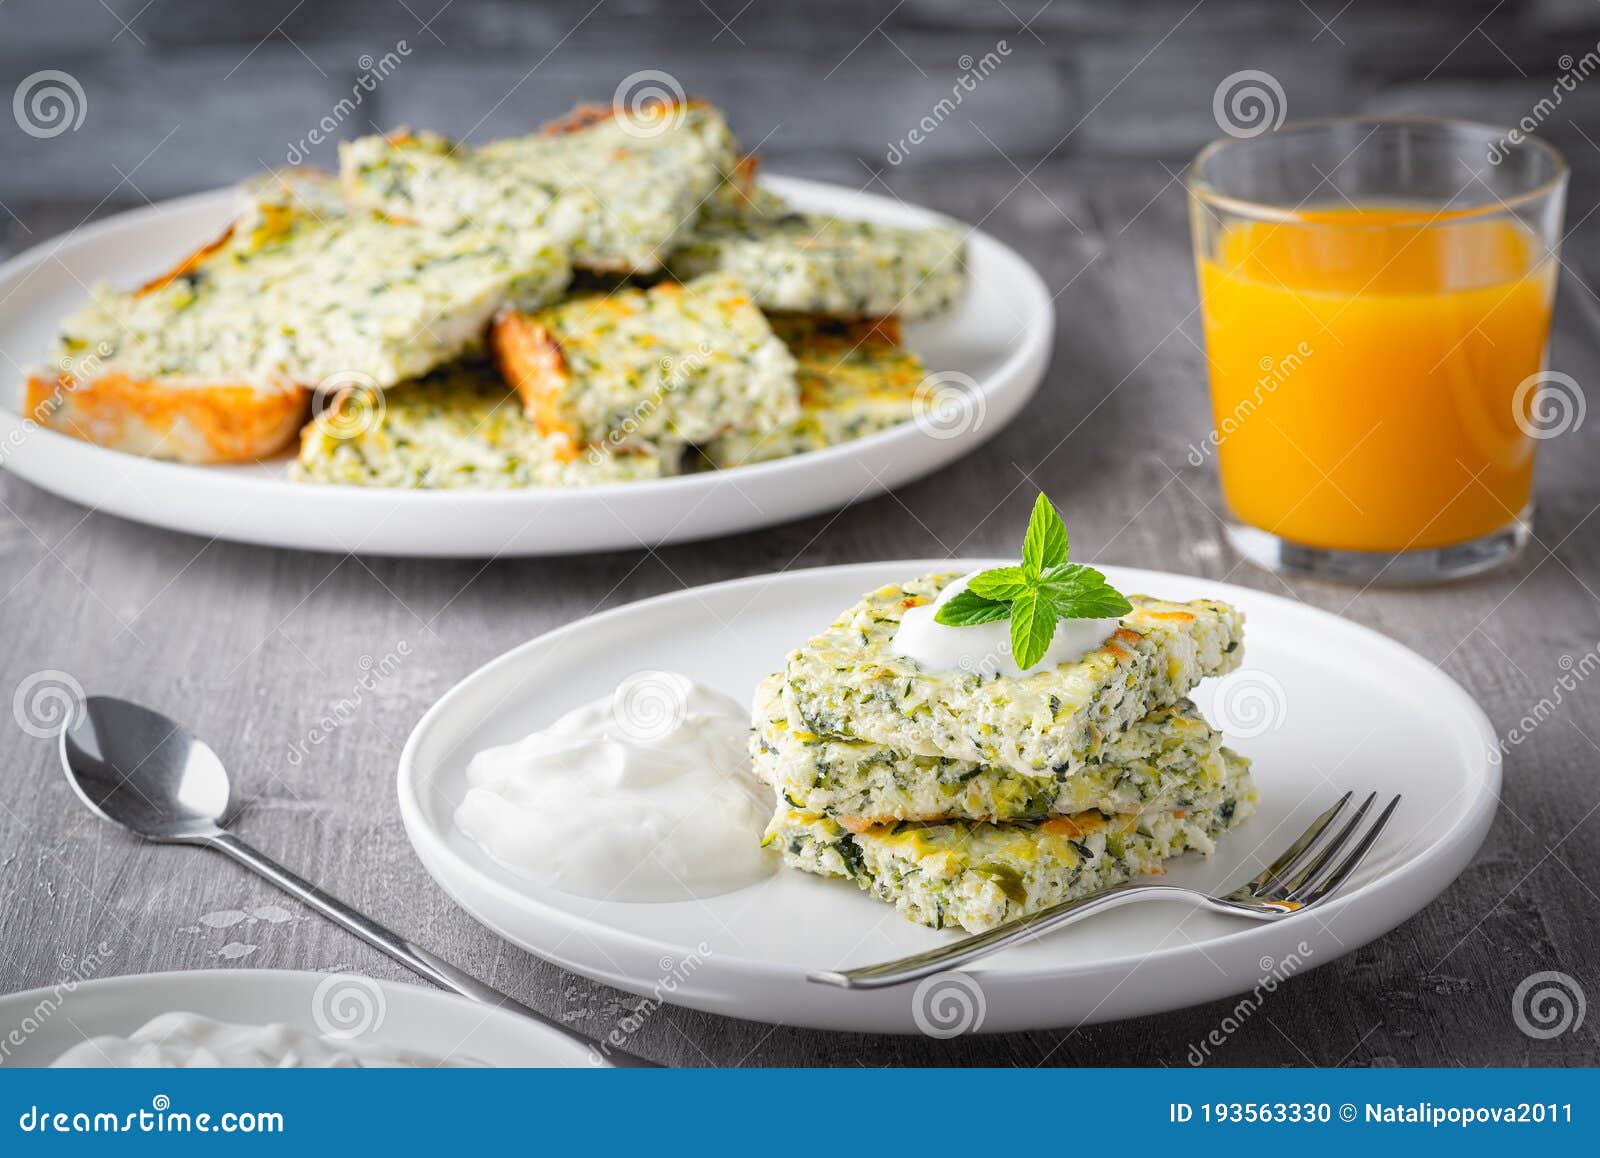 Casserole with Cheese, Zucchini and Orange Juice Stock Photo - Image of ...